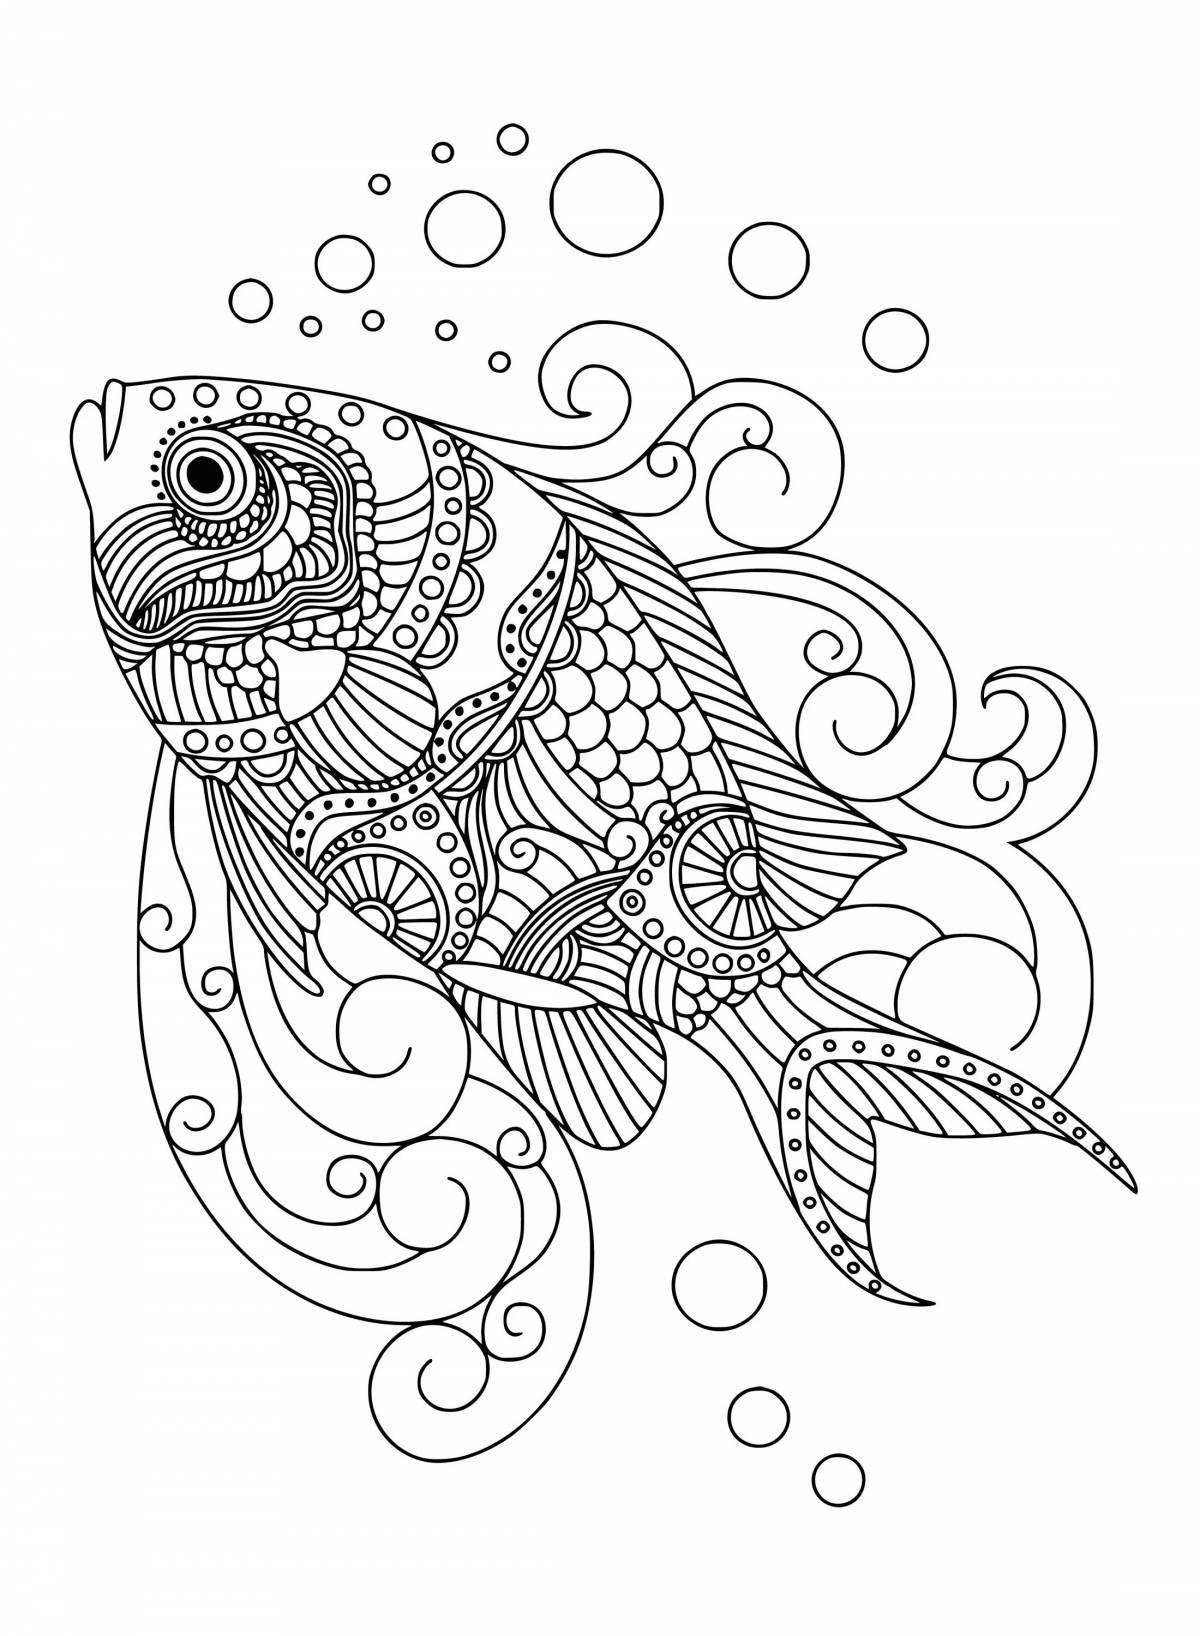 Inspirational relaxation coloring book